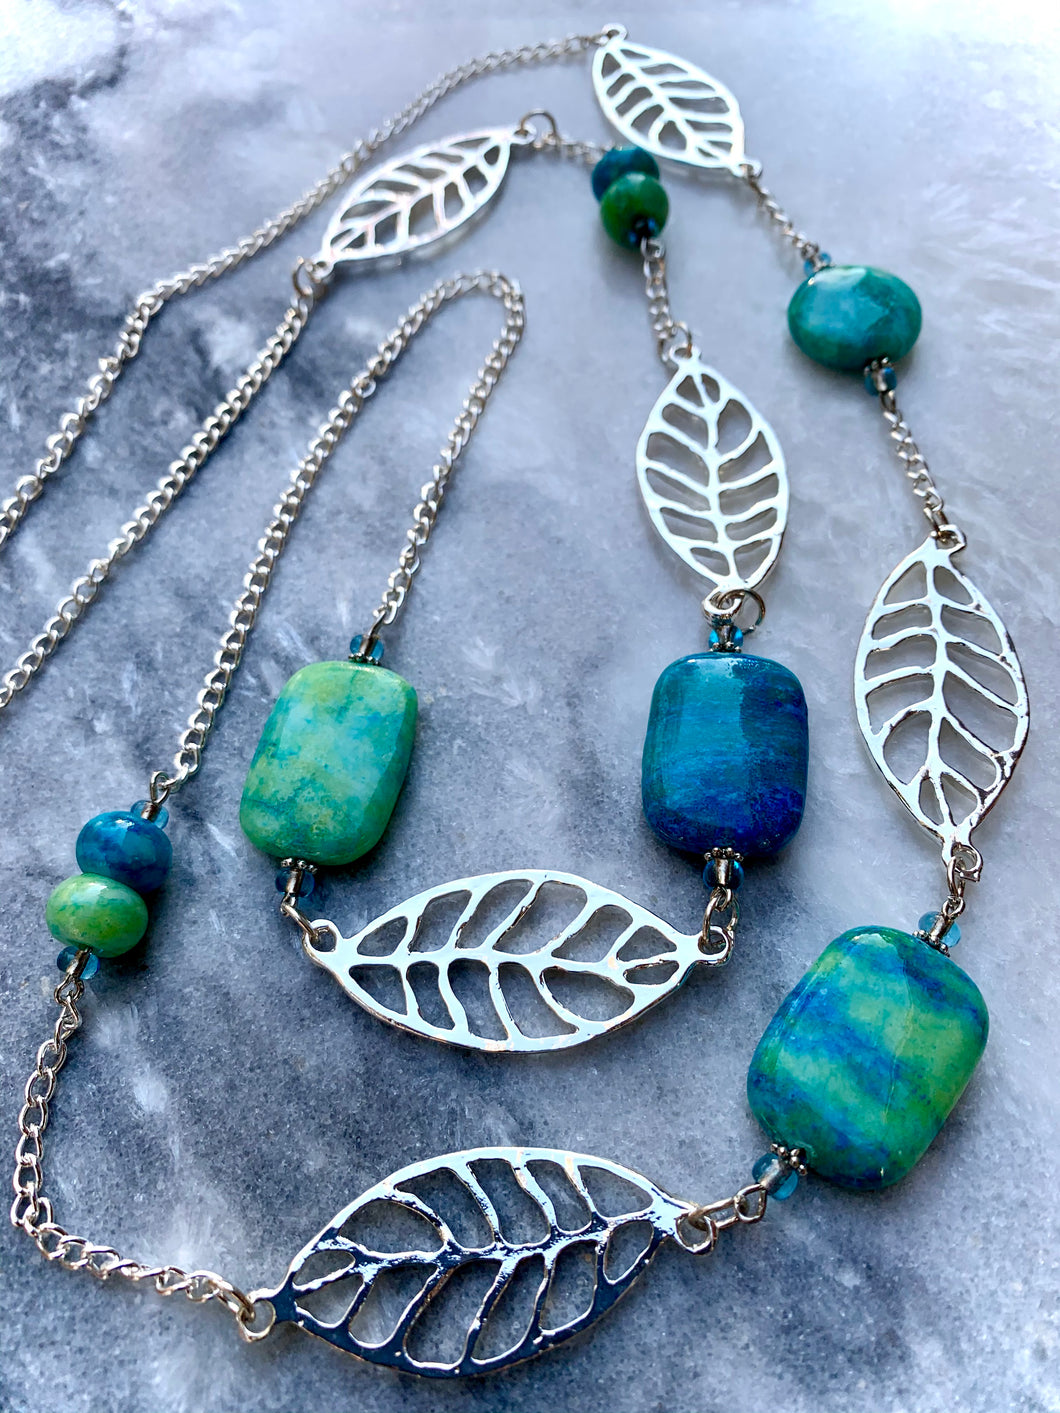 Blue-Green Amazonite Stones, Silver Leaf Chain Necklace and Chrysocolla Earrings